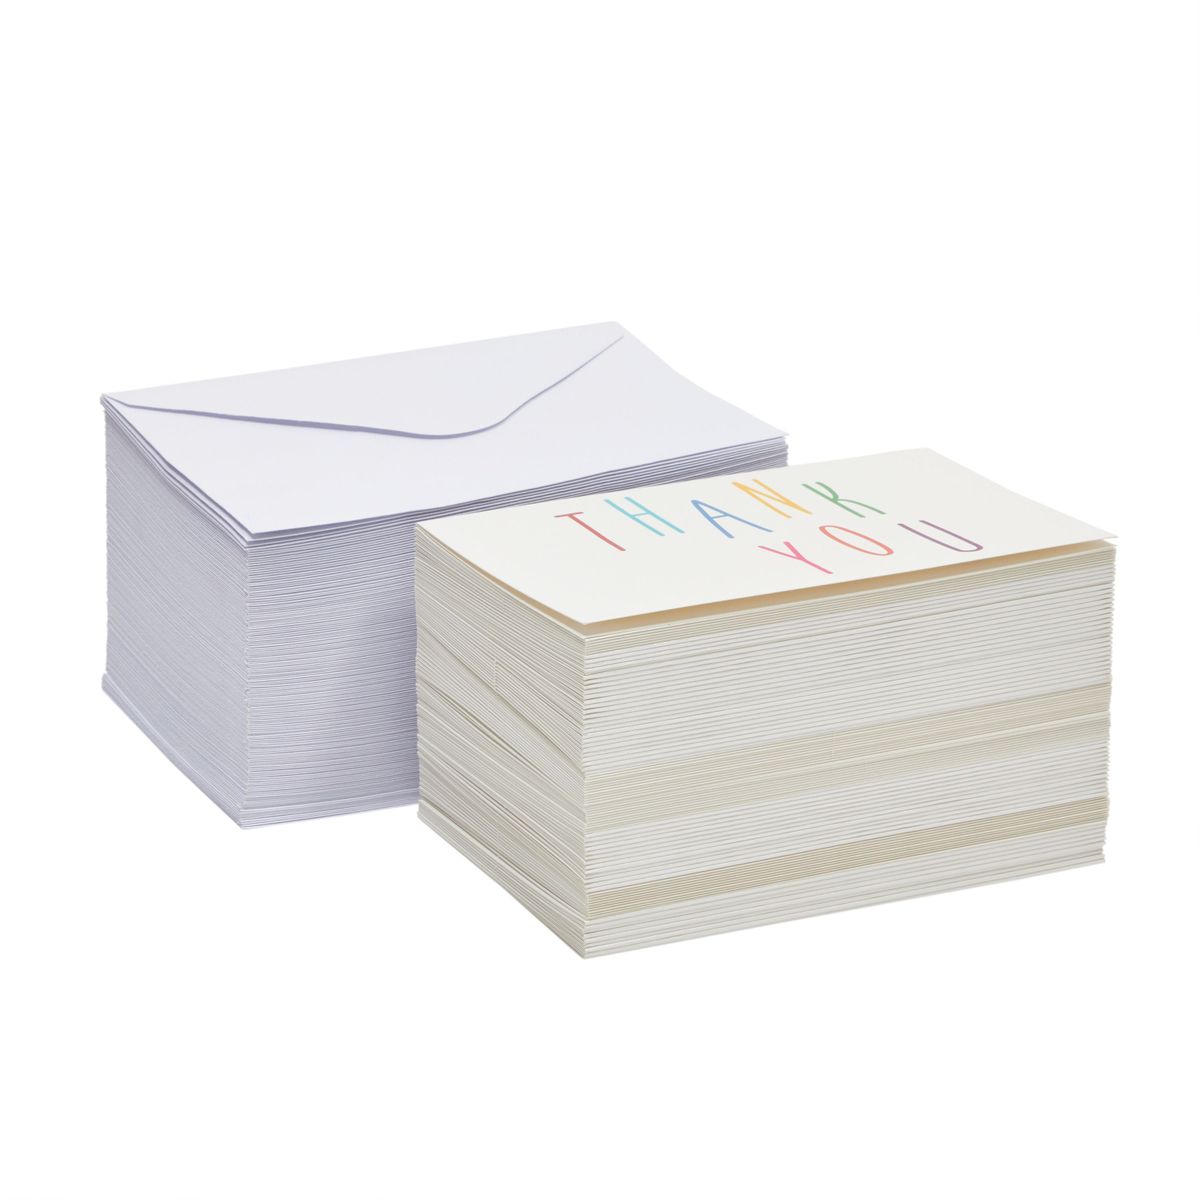 100 All Occasion Assorted Blank Cards – 100 Unique Designs Stationery Notes  with Multi Color Envelopes and Stickers – Bulk Box Greeting Set 4 x 6 Inch  — T&M Quality Designs LLC a U.S Company